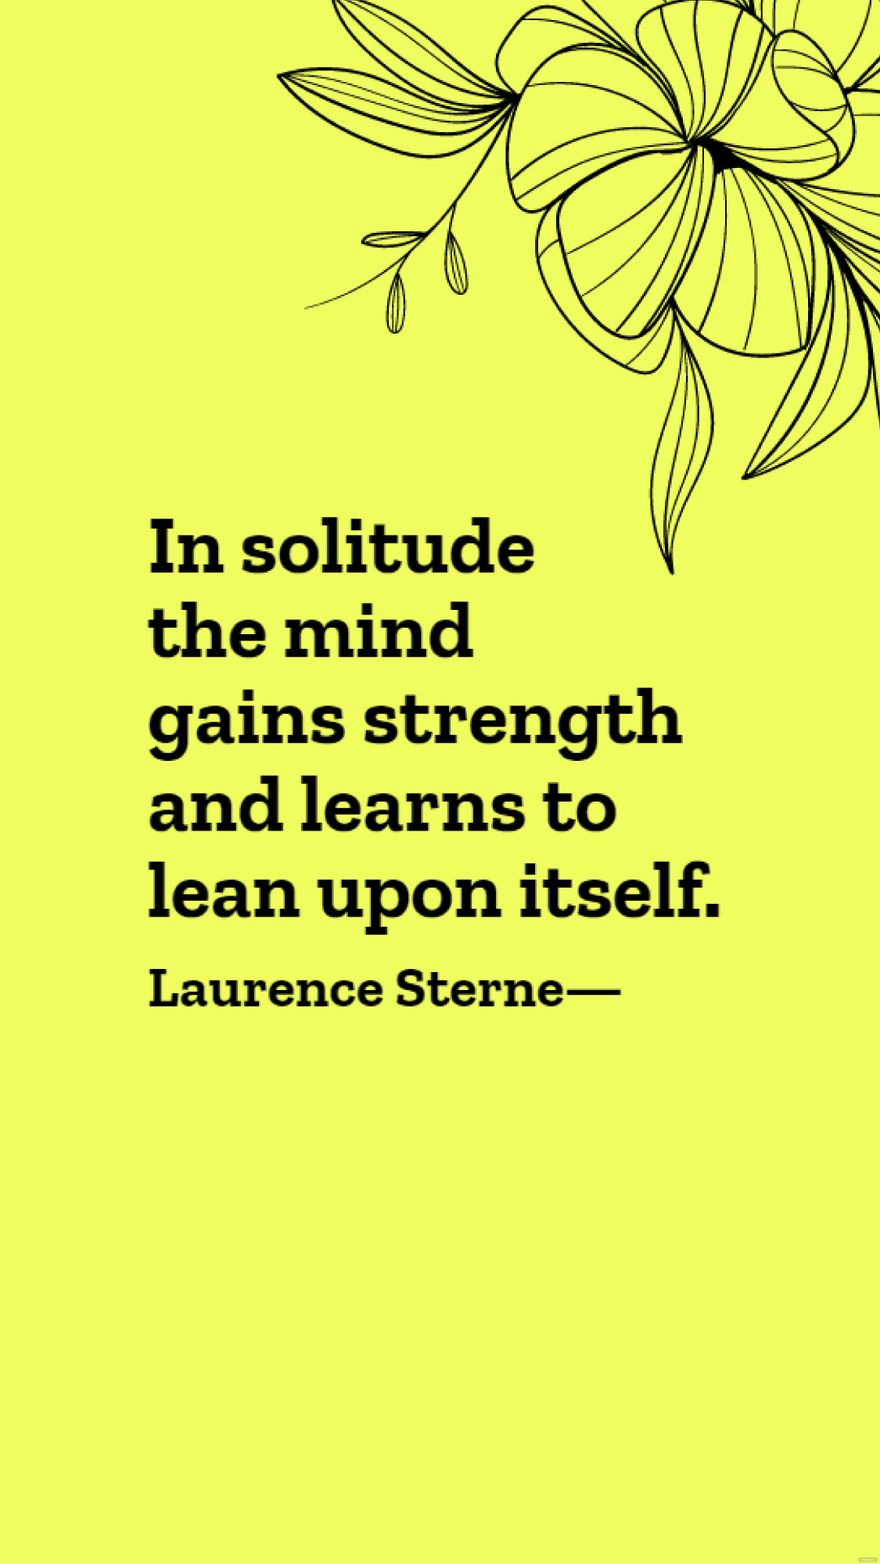 Laurence Sterne - In solitude the mind gains strength and learns to lean upon itself.